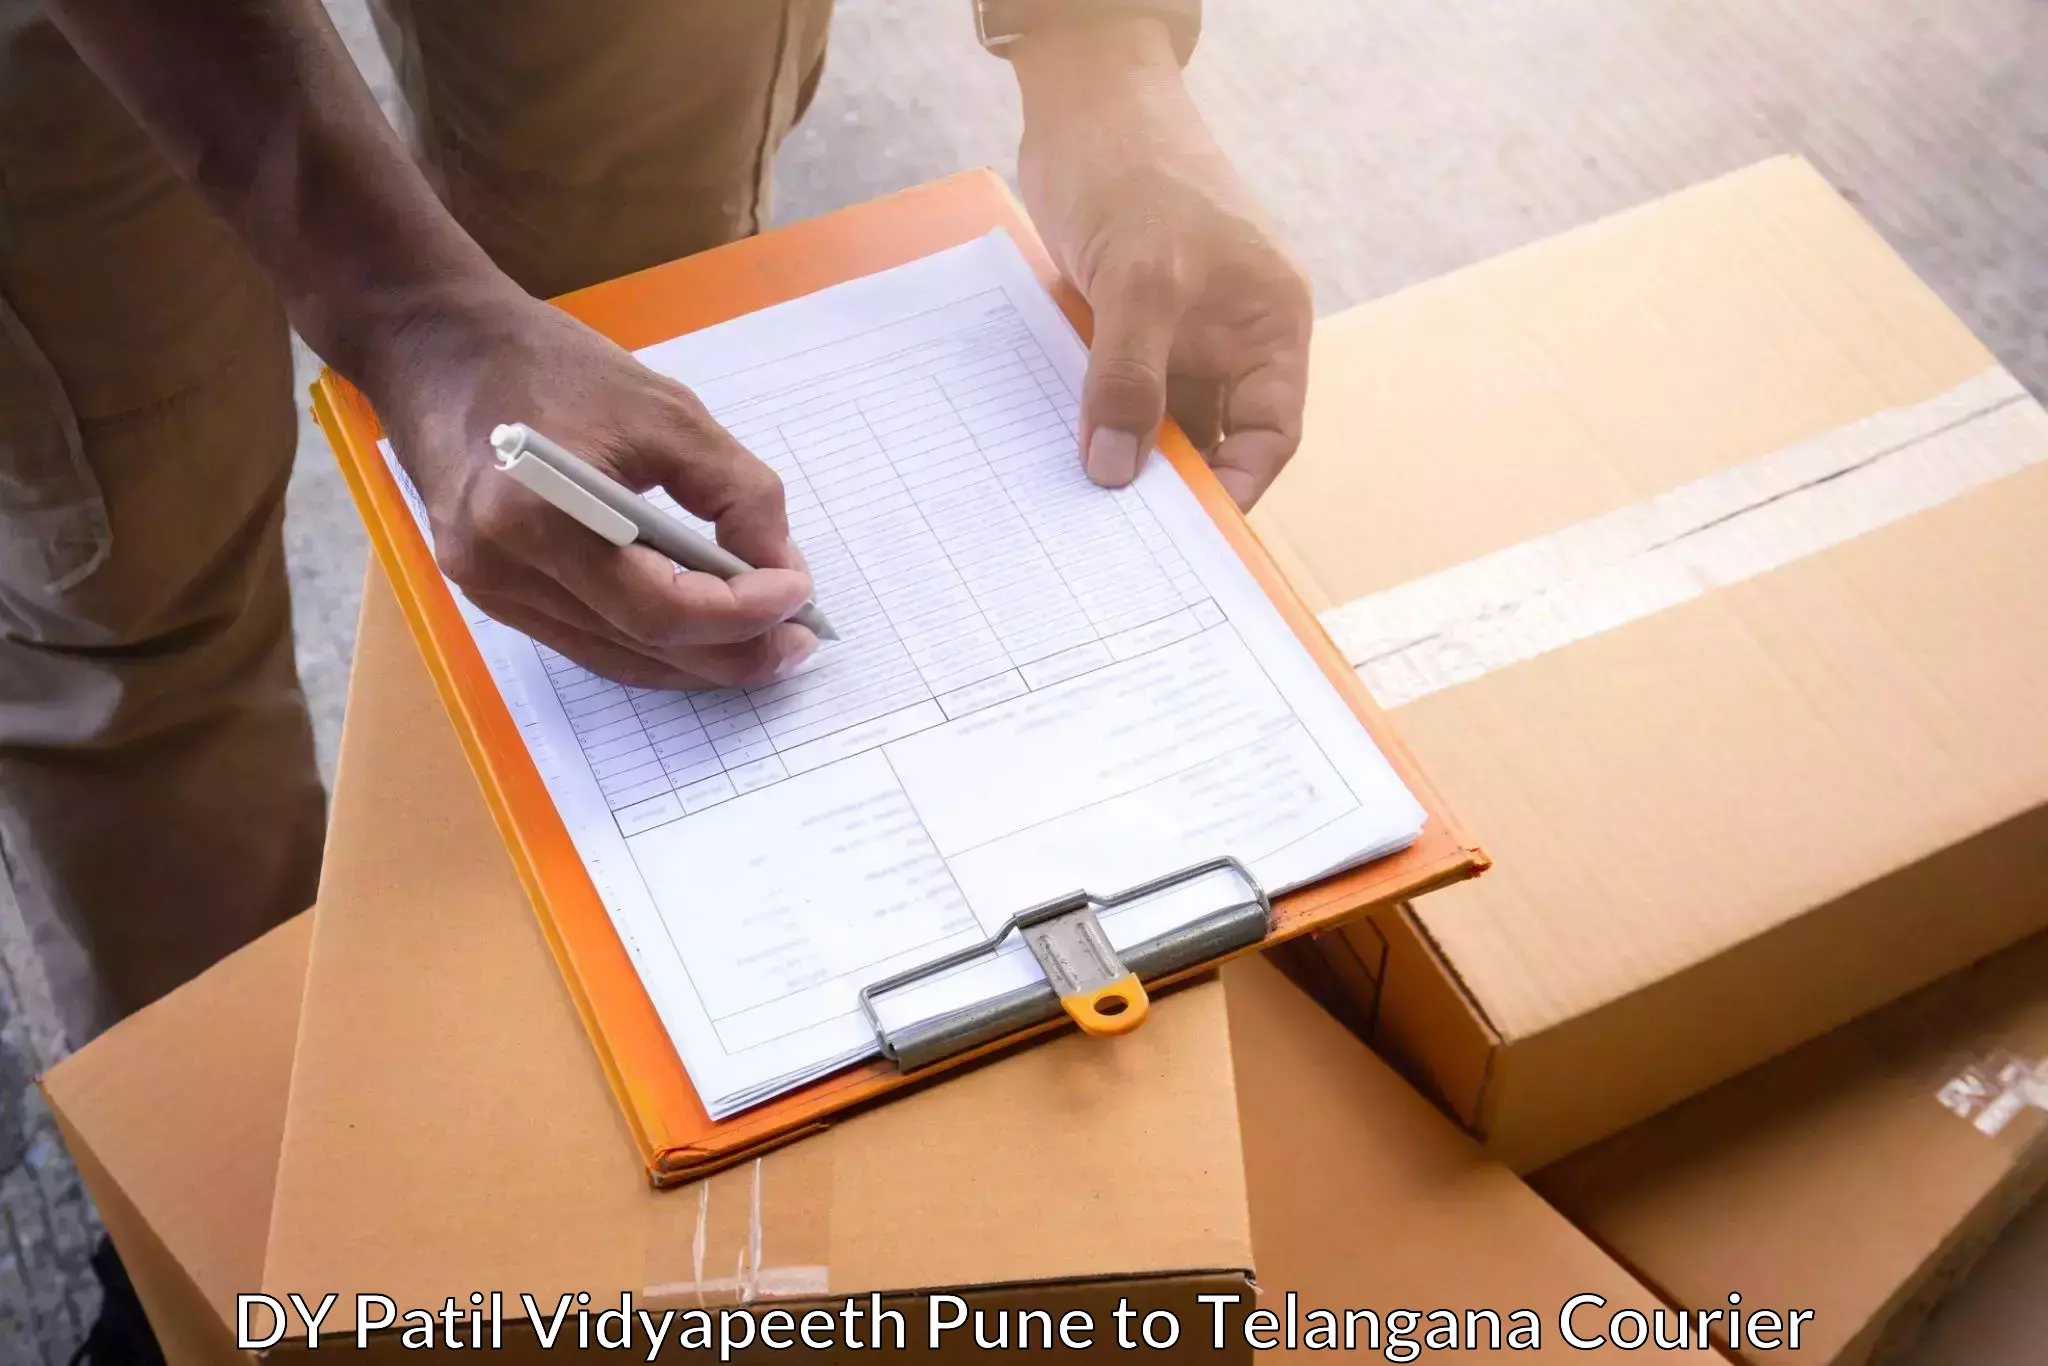 Express delivery solutions DY Patil Vidyapeeth Pune to Kaghaznagar